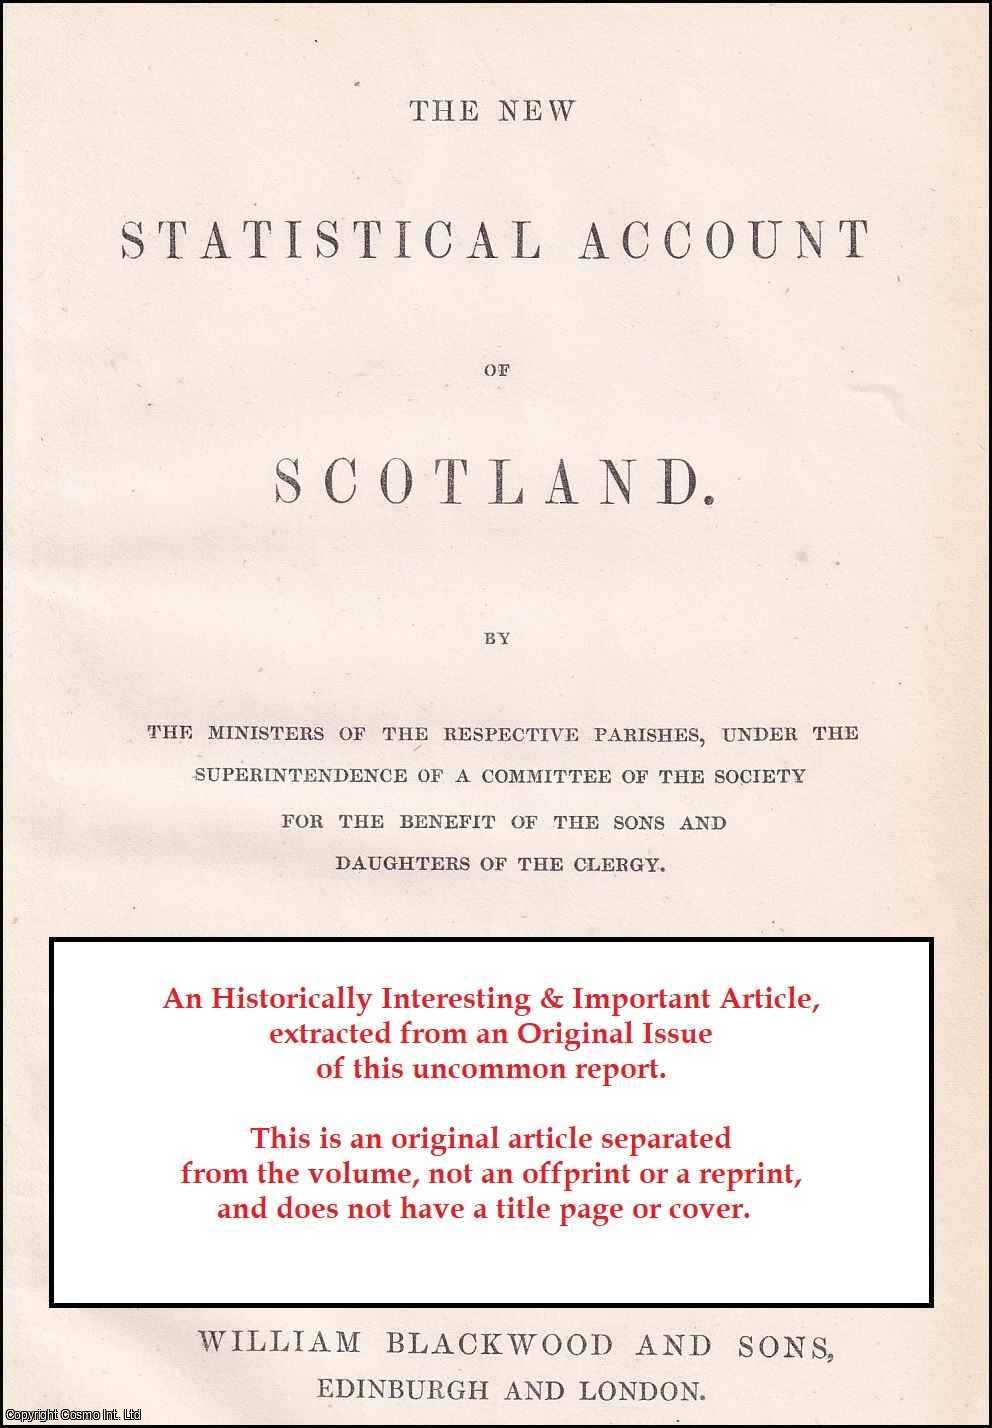 Rev. Alexander H. Gray - Parish of Trinity-Gask. Presbytery of Auchterarder, Synod of Perth and Stirling. An uncommon original article from The New Statistical Account of Scotland, 1845.